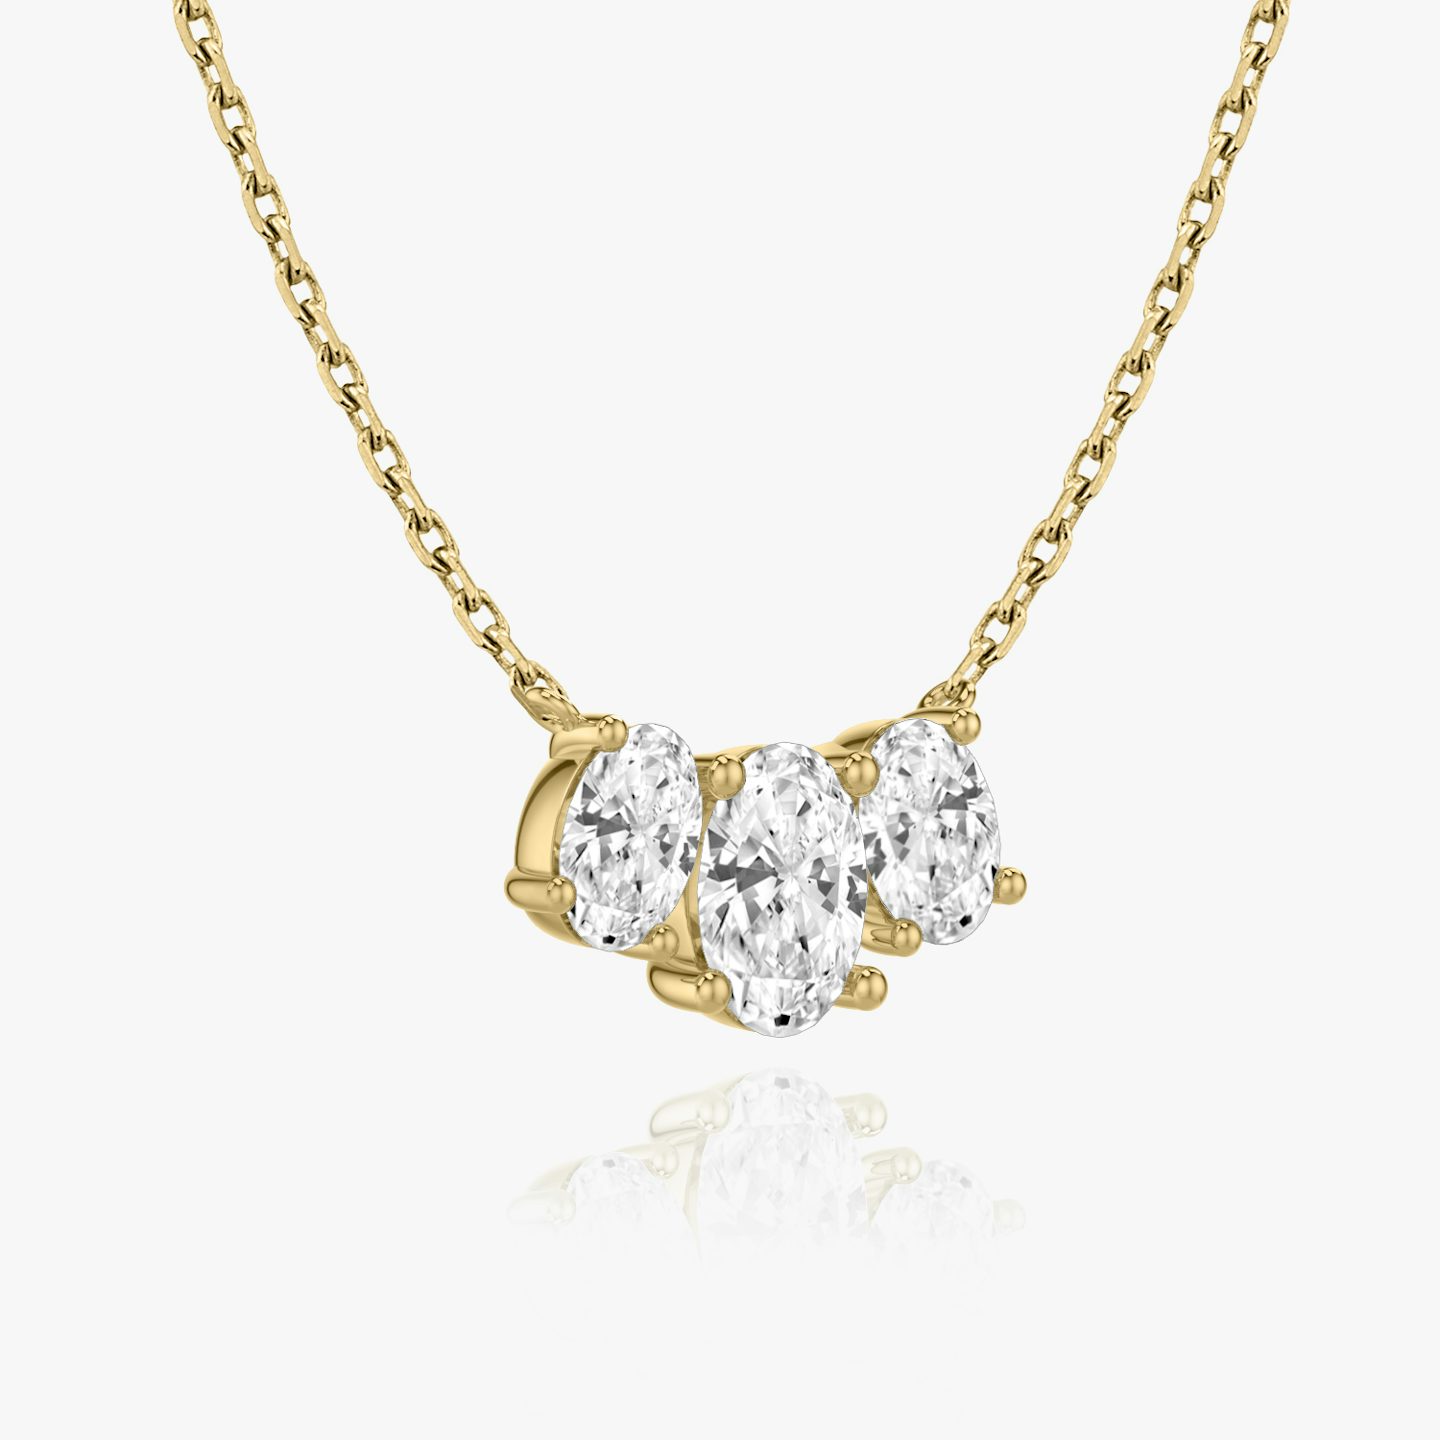 Arc Necklace | Oval | 14k | 18k Yellow Gold | Chain length: 16-18 | Diamond size: Large | Diamond count: 3